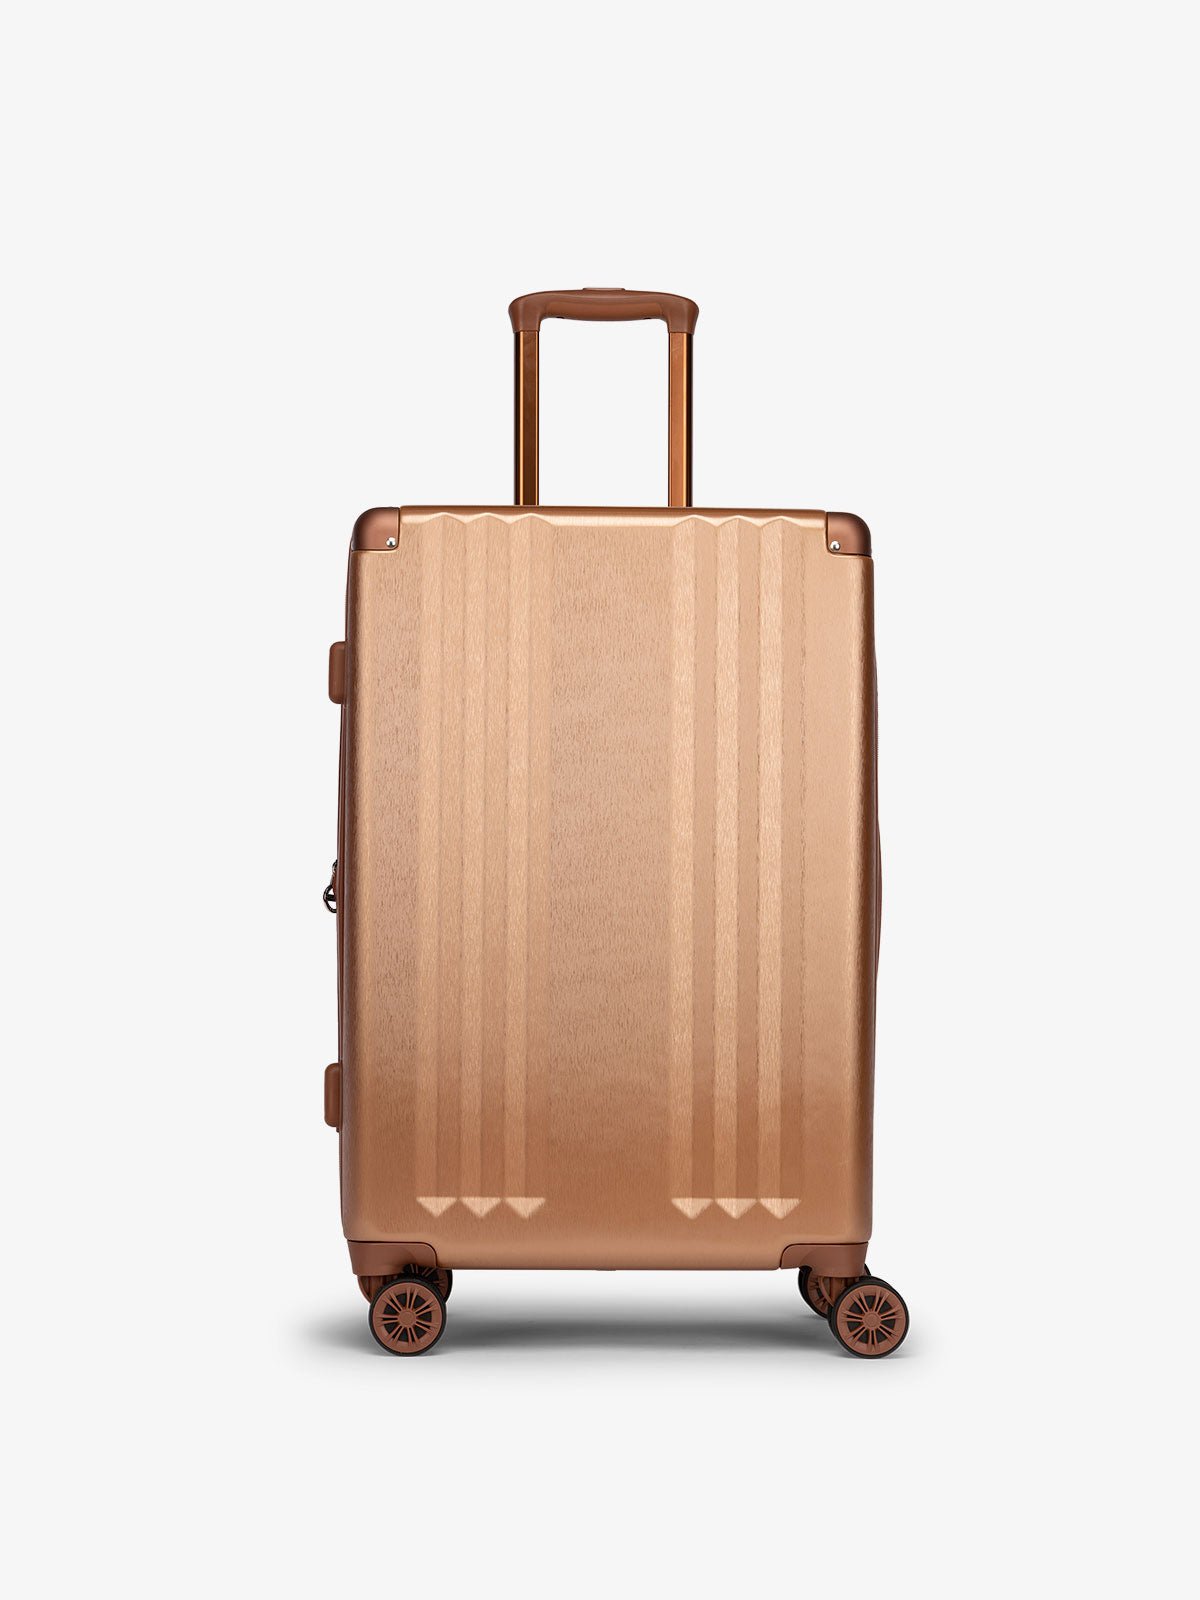 Hard shell medium luggage as part of the Ambeur luggage set in copper